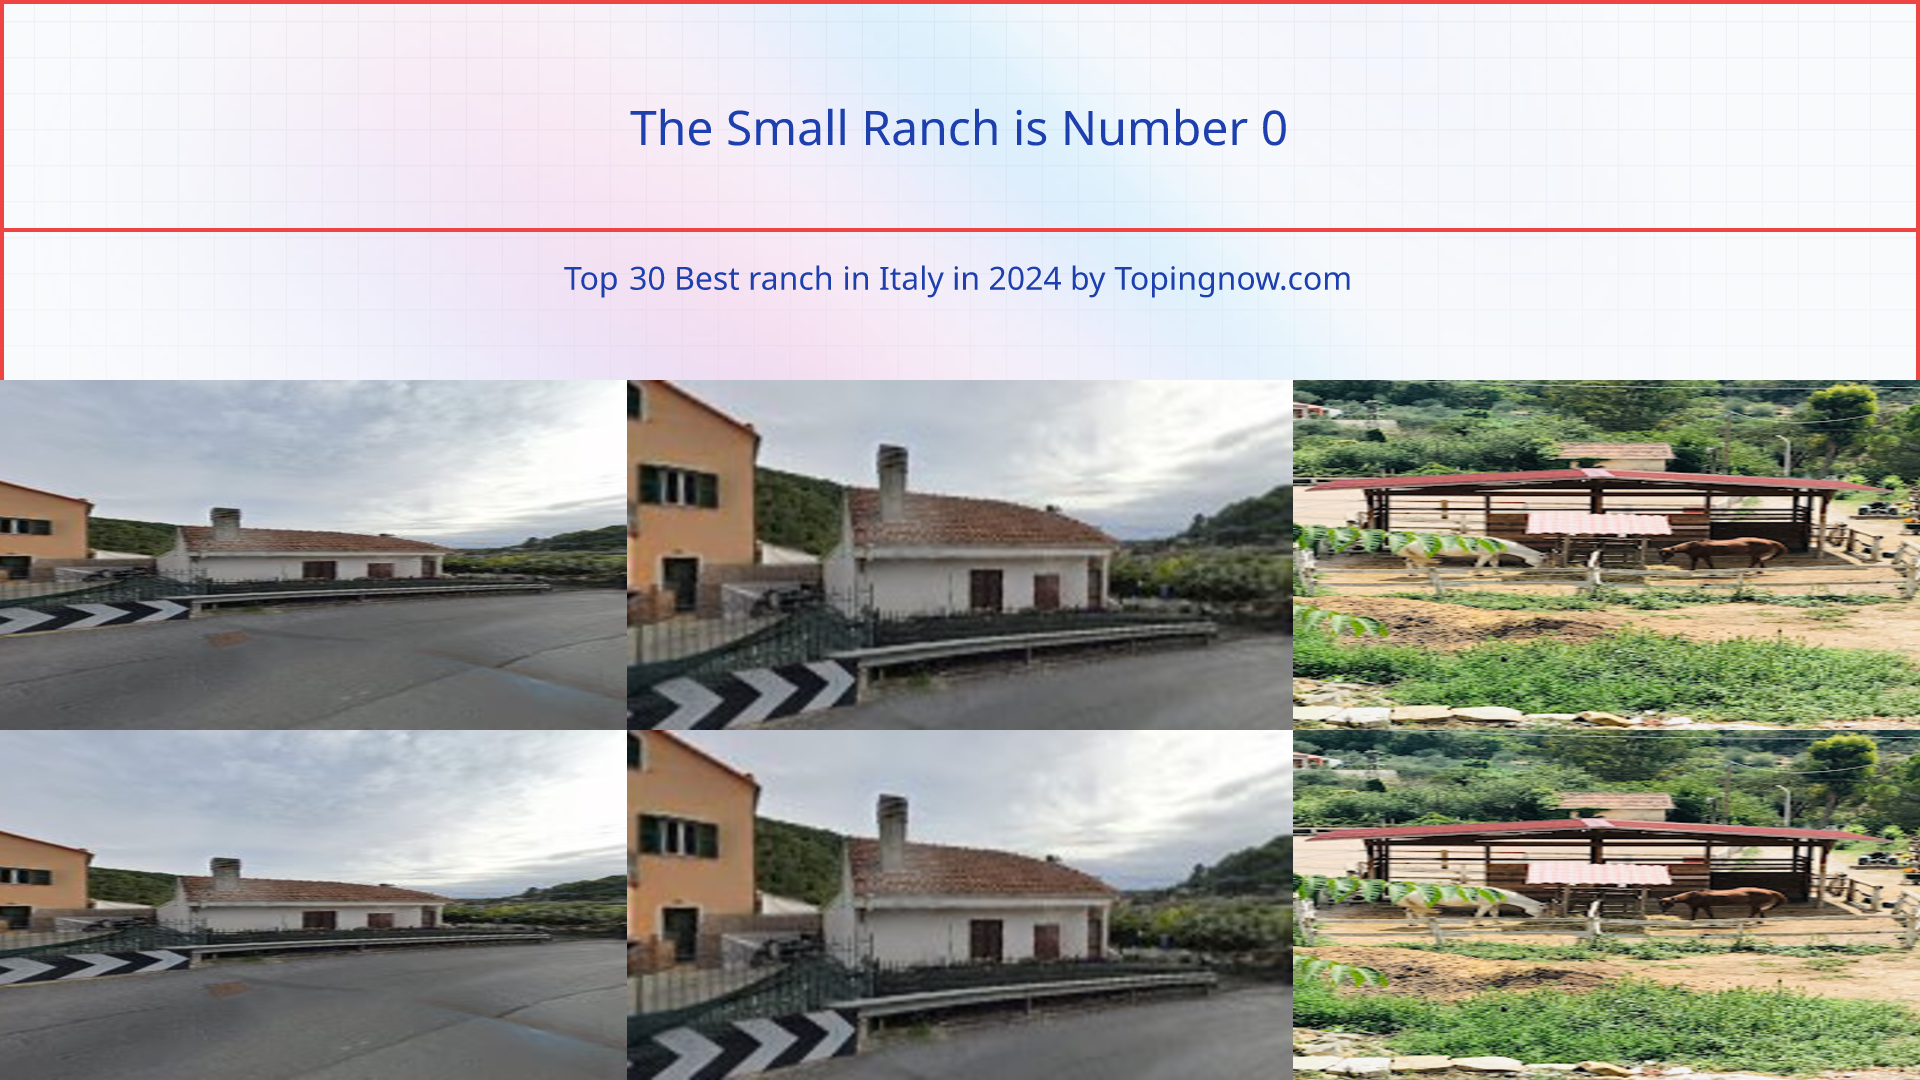 The Small Ranch: Top 30 Best ranch in Italy in 2024